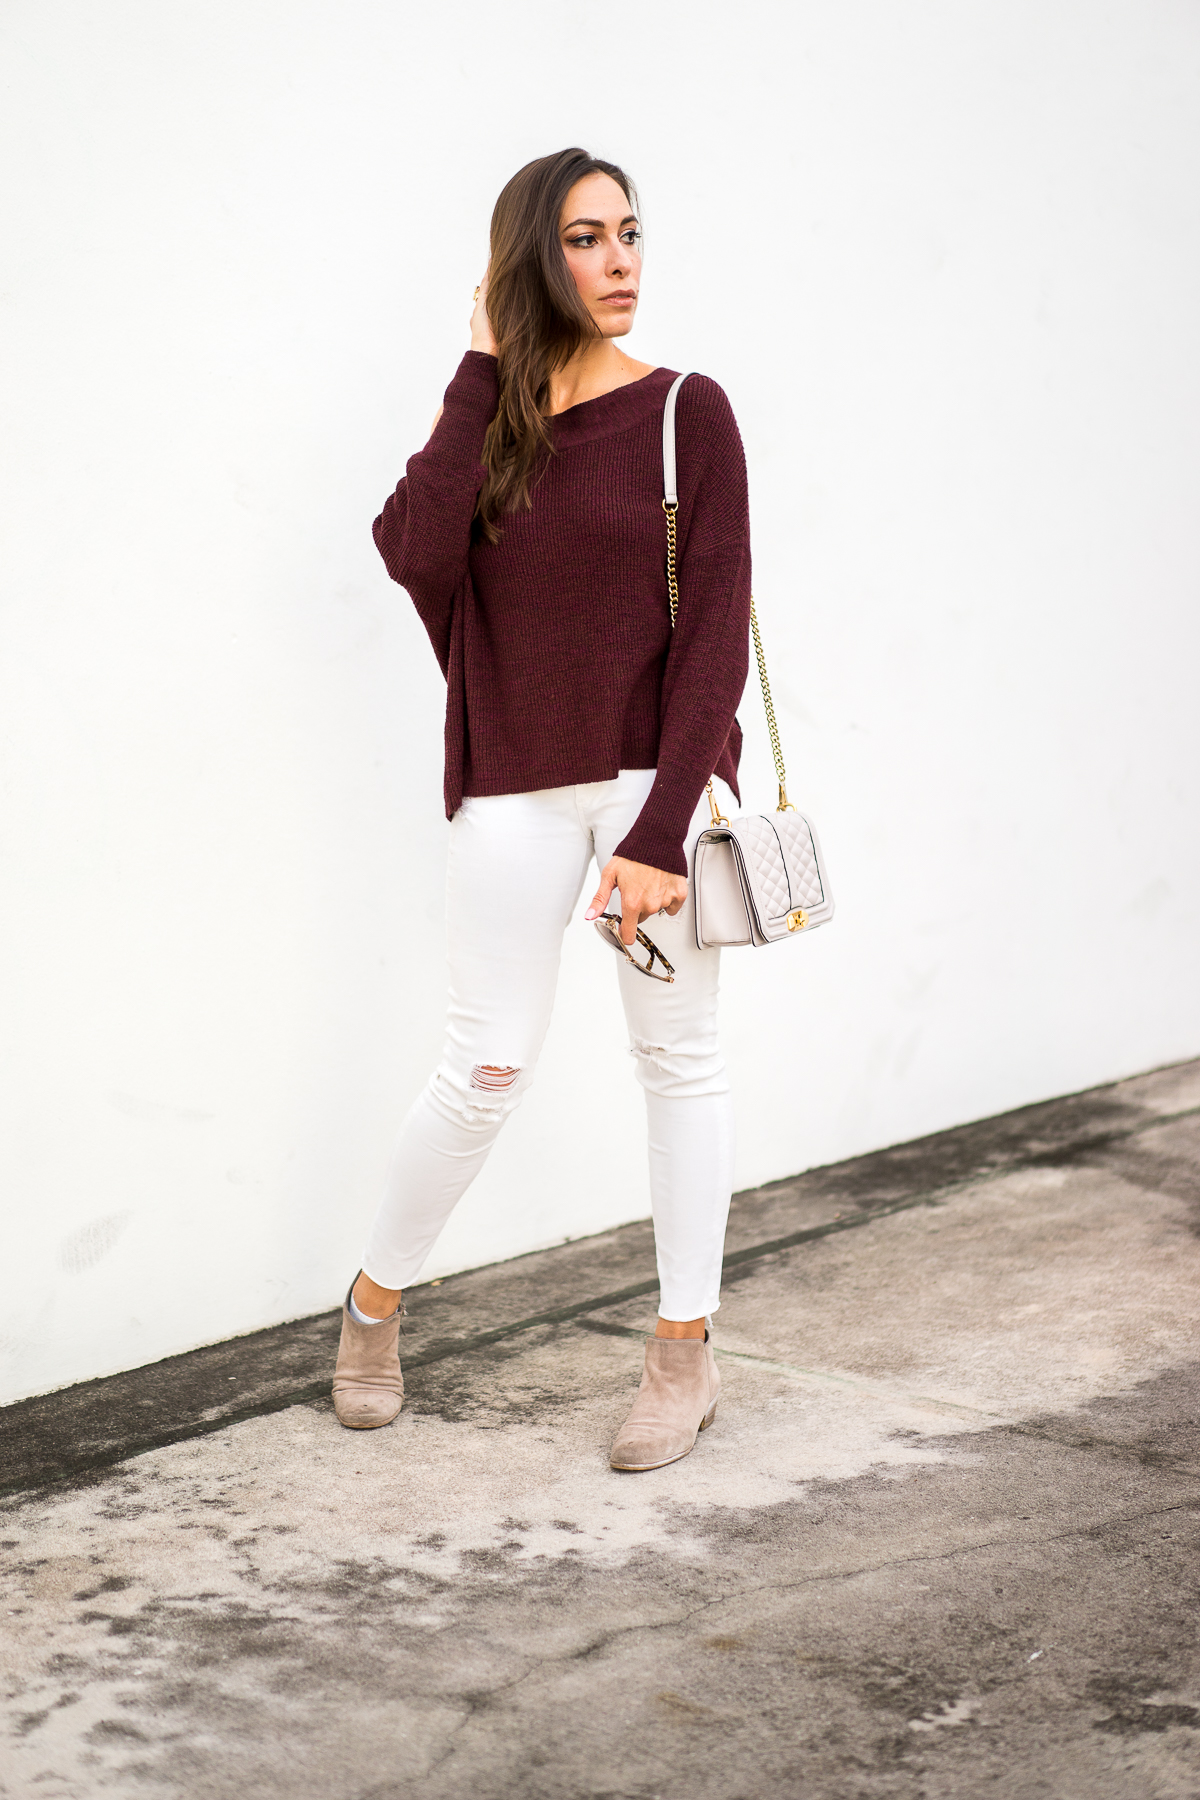 A Glam Lifestyle fashion blogger Amanda Mercado shows you how to wear falls trends including this burgundy off the shoulder sweater